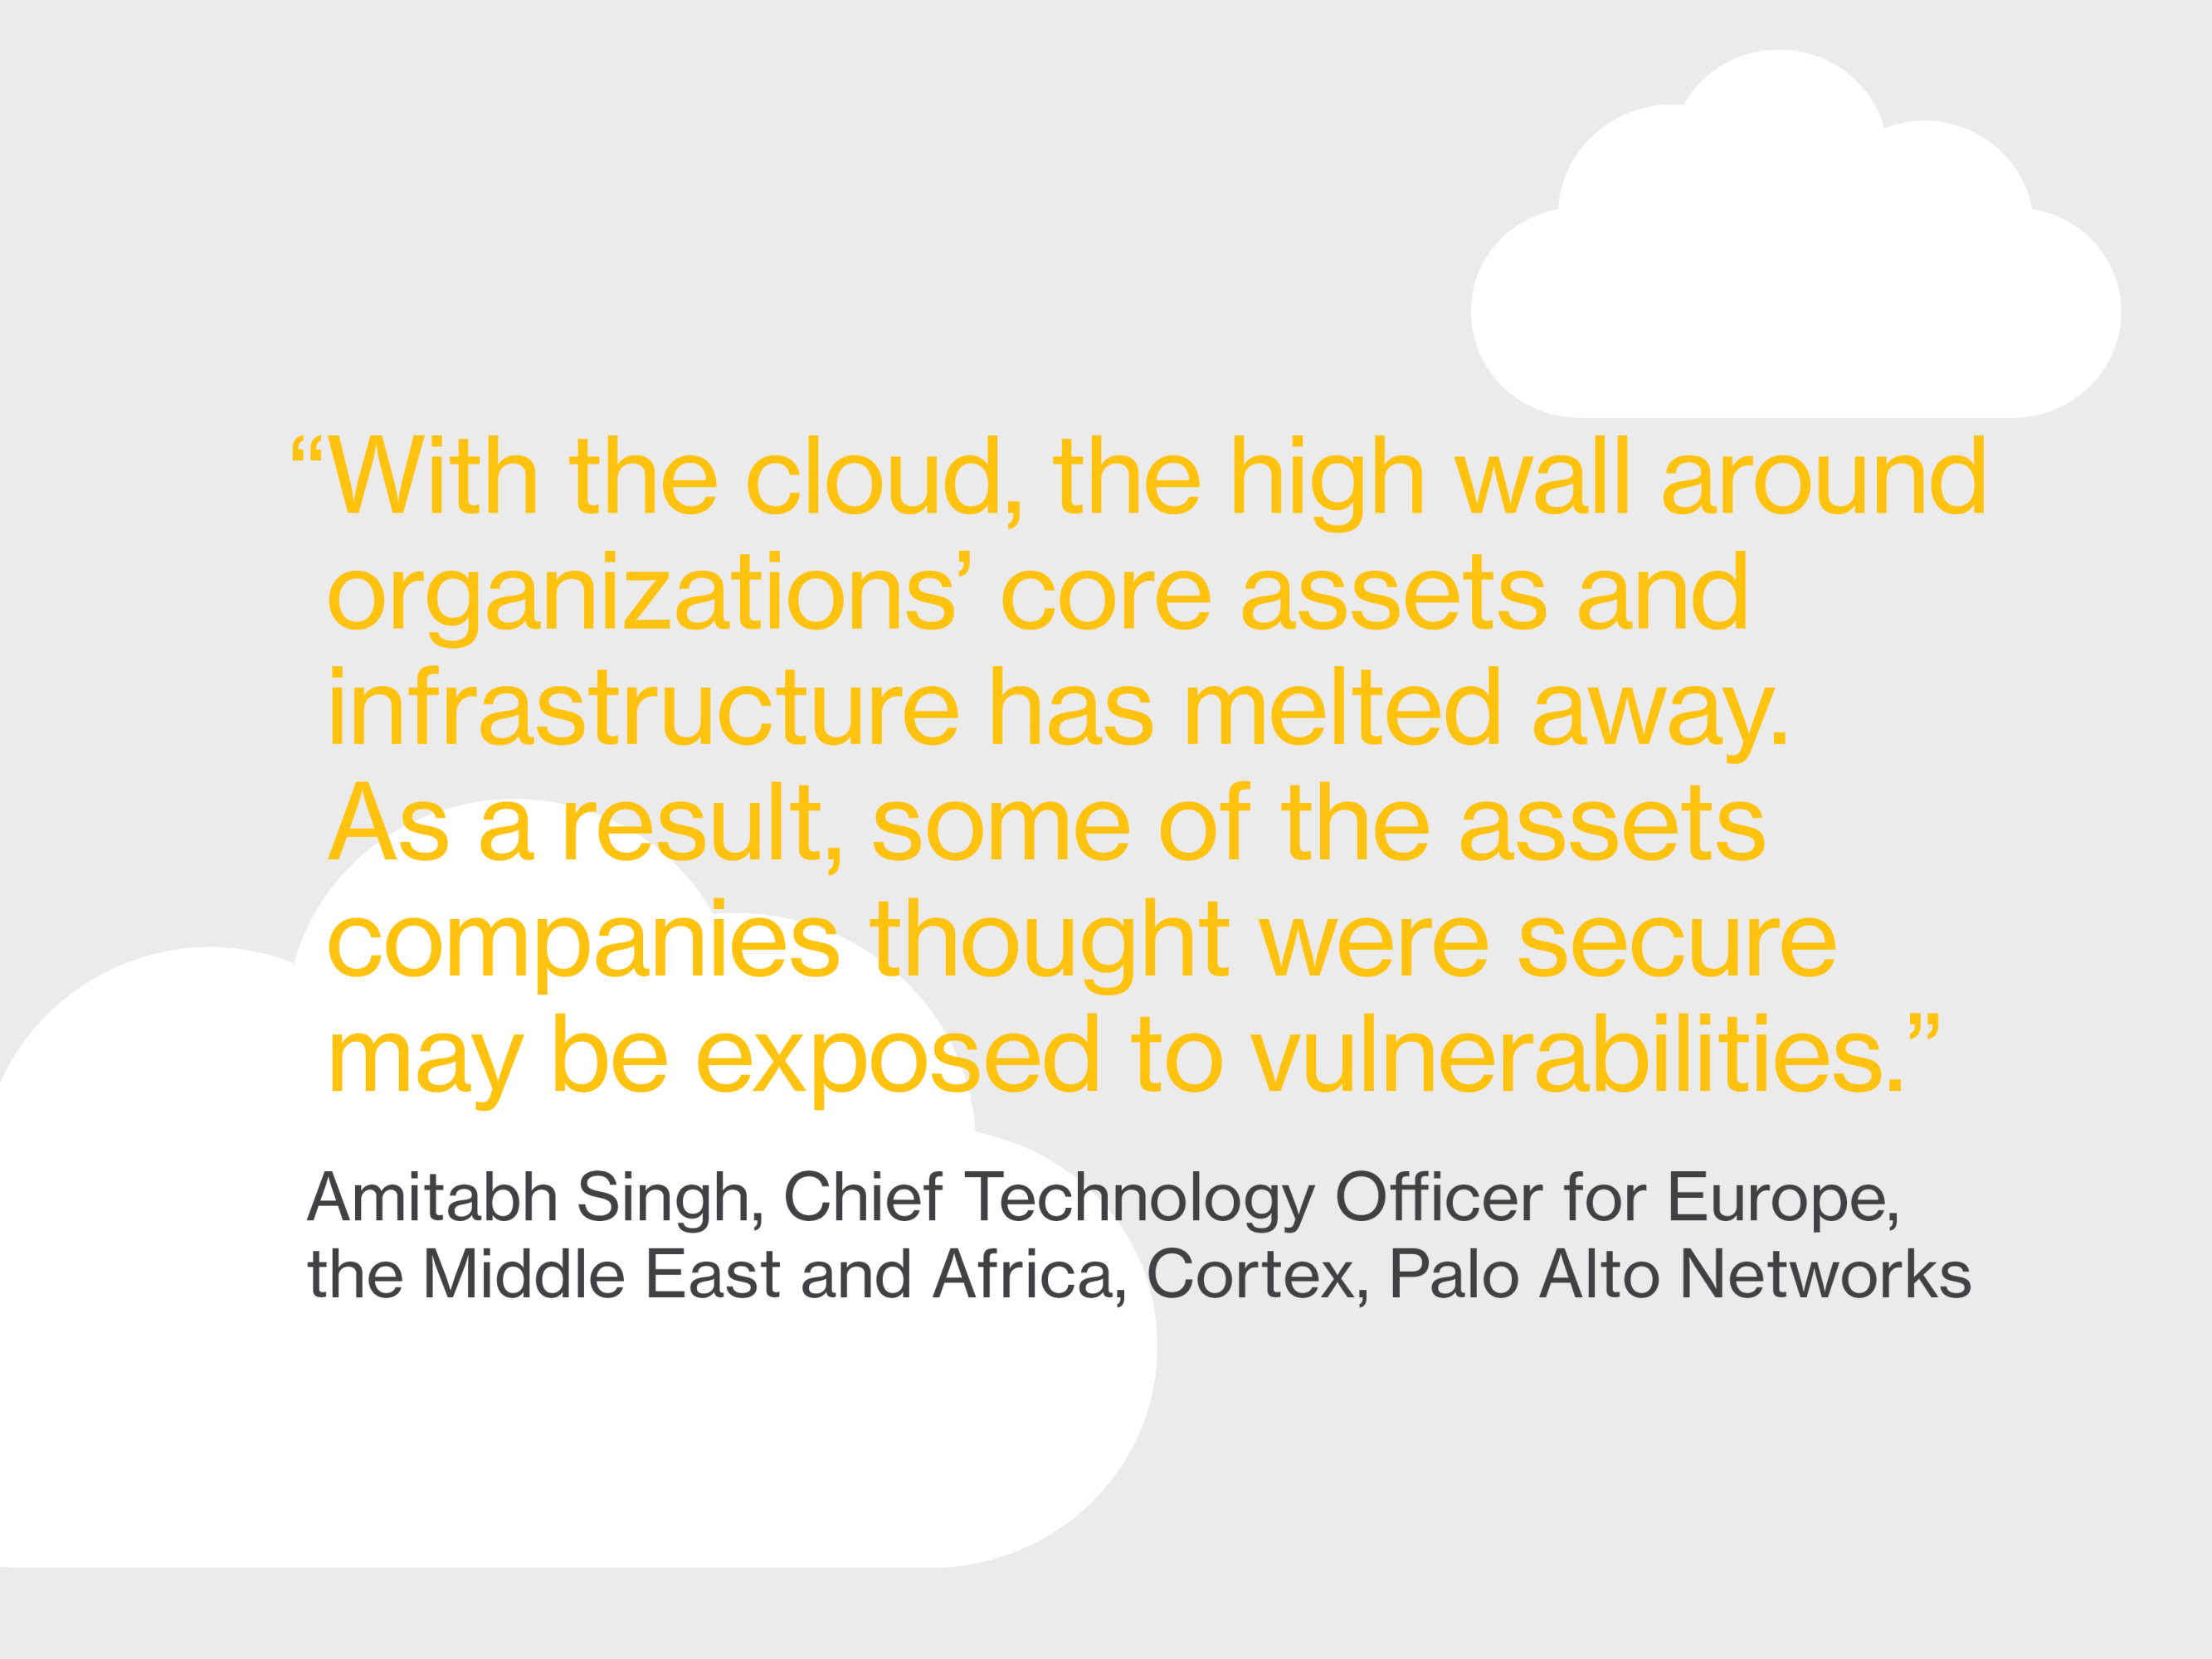 IT security starts with knowing your assets: Europe, the Middle East, and Africa